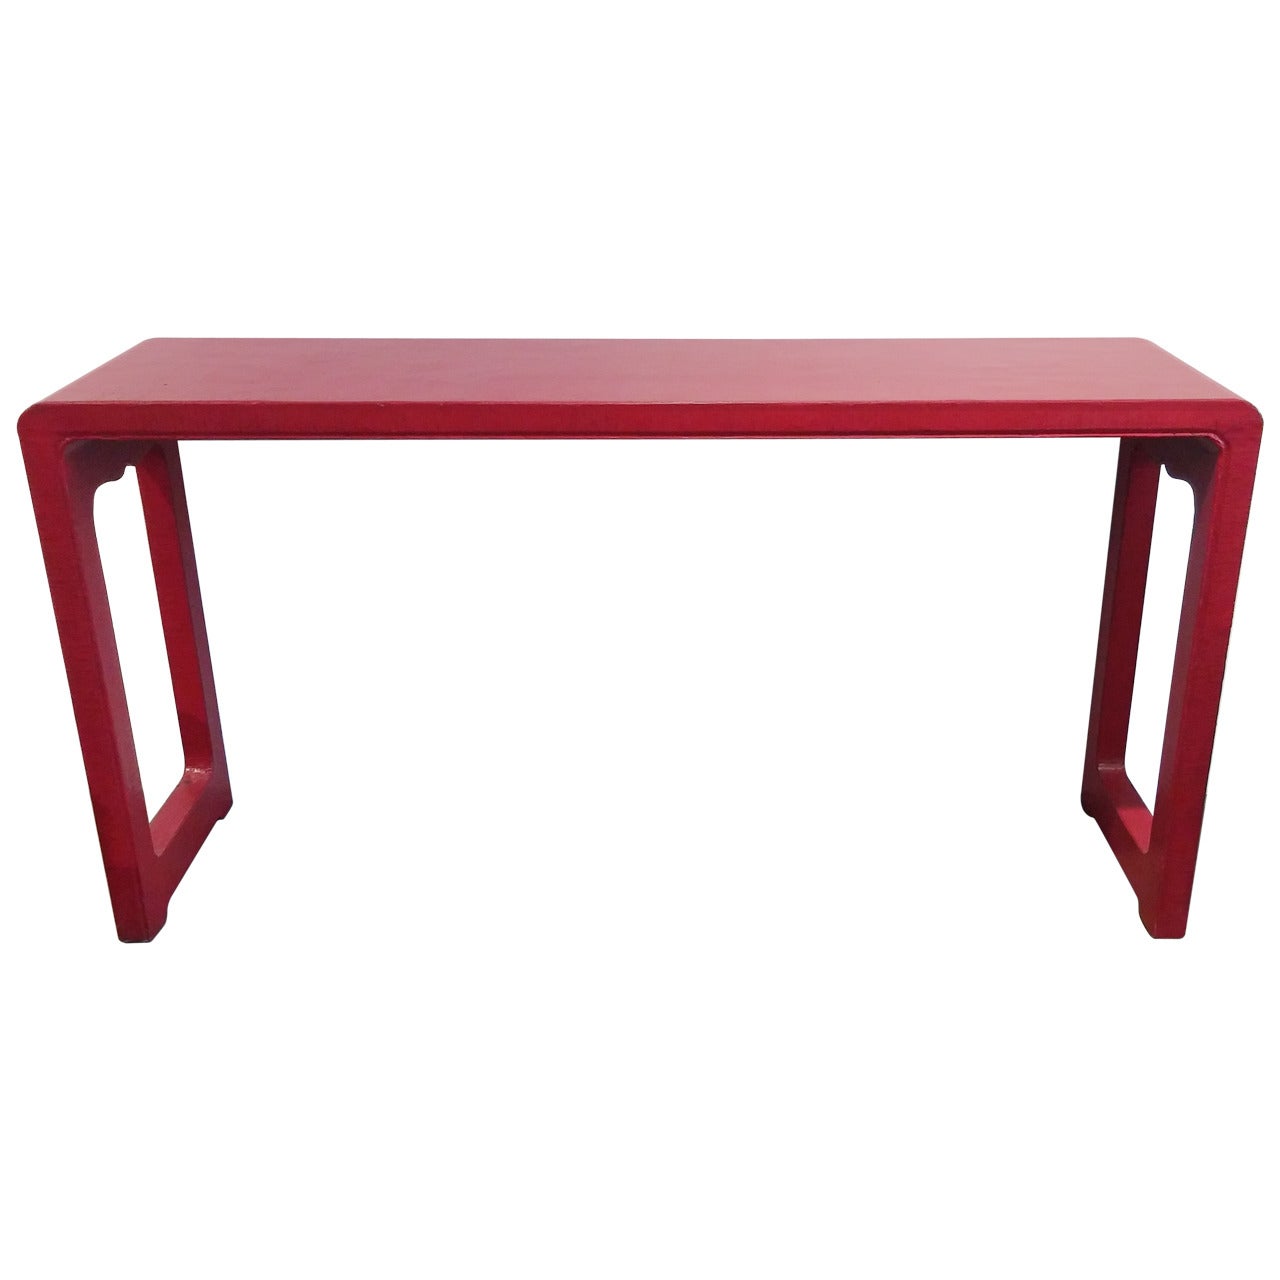 Asian Alter Table in Red Finish For Sale